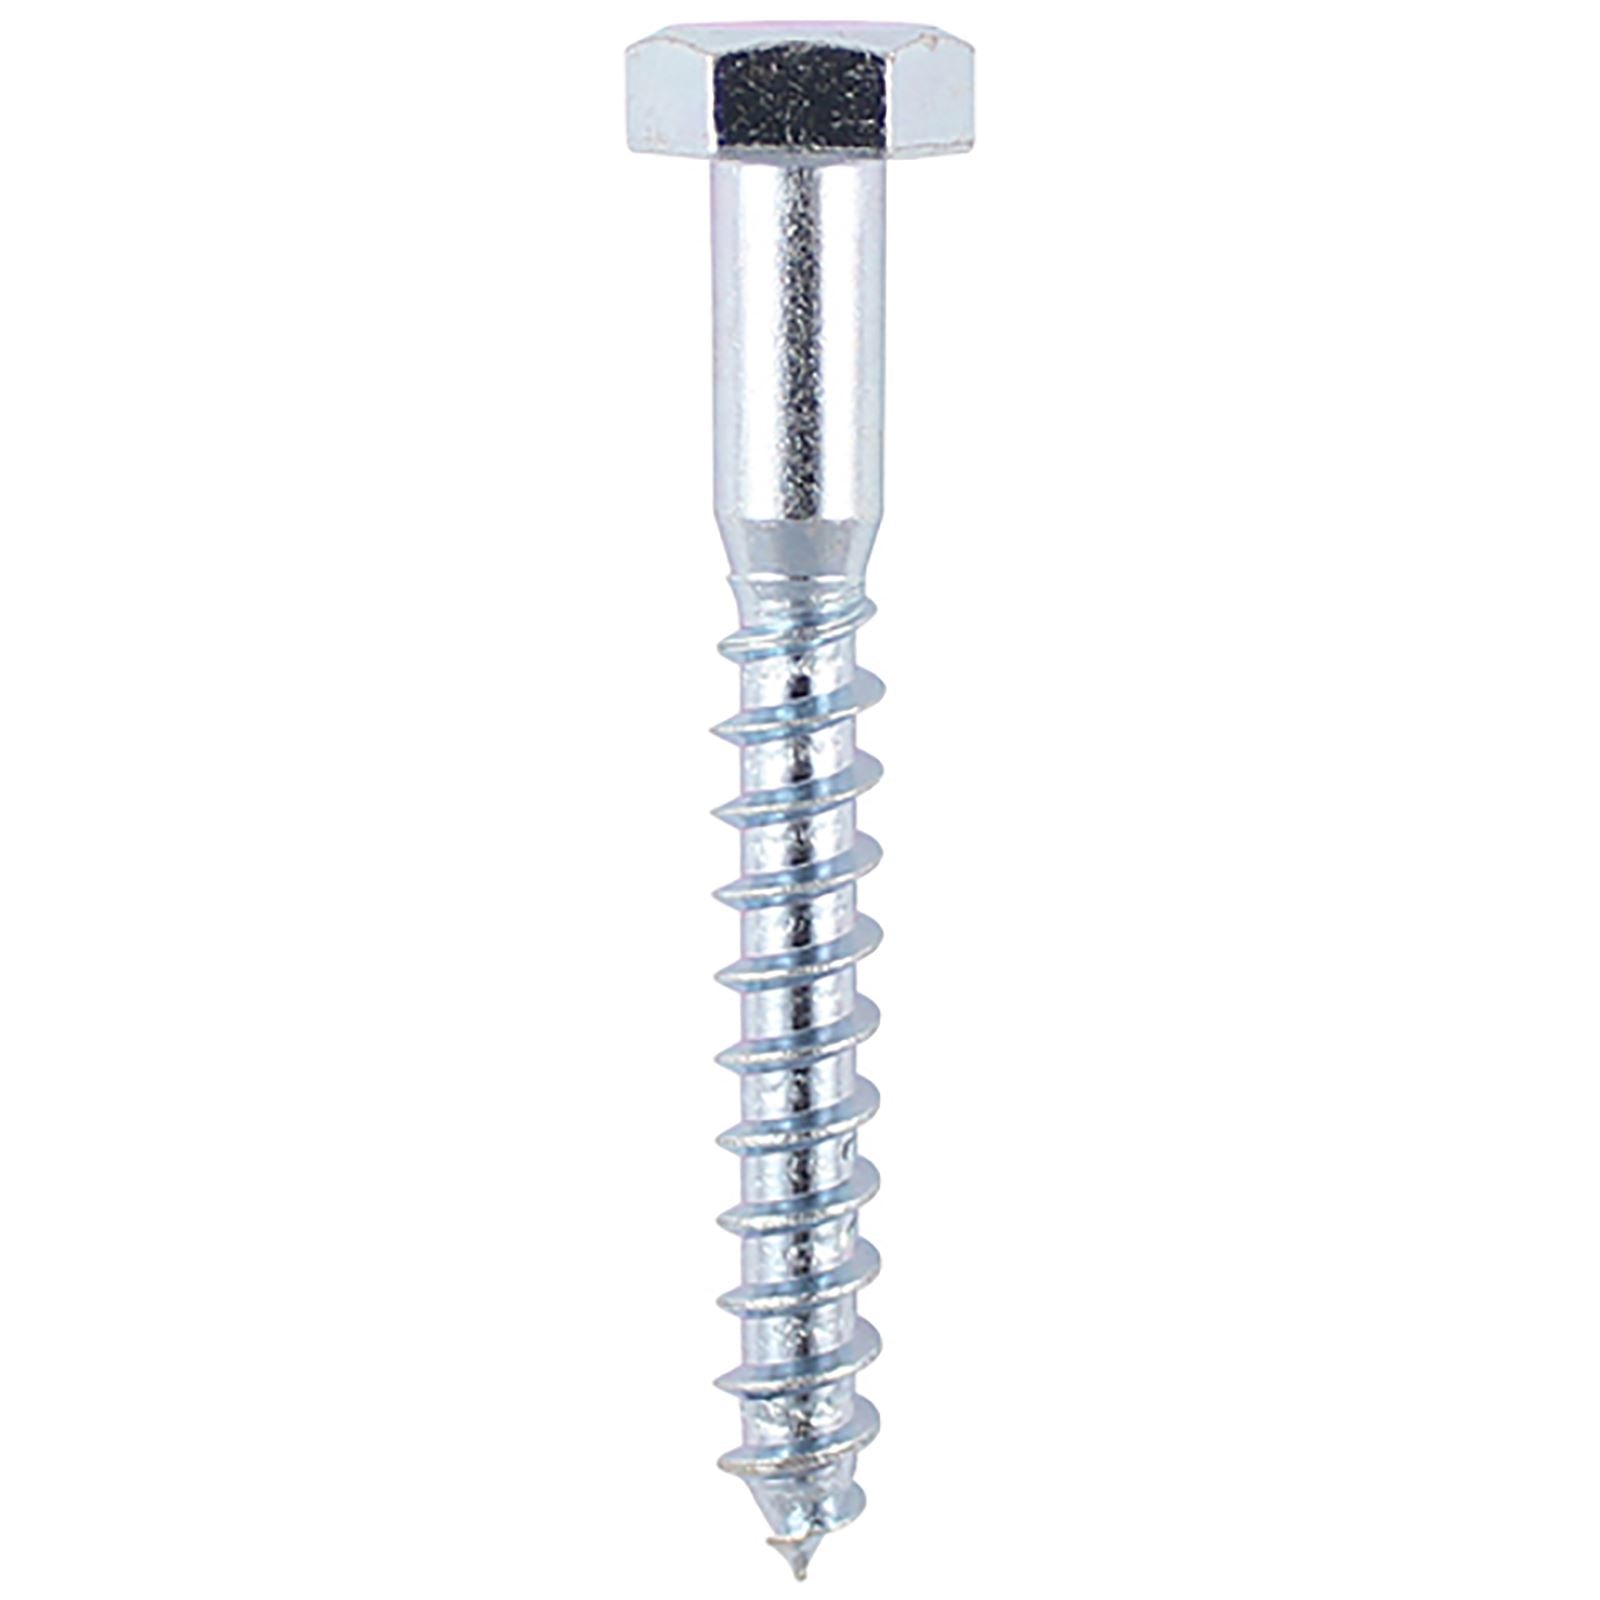 TIMCO Coach Screw Hex Head Zinc Plated Heavy Duty Woodscrew Timber to Timber